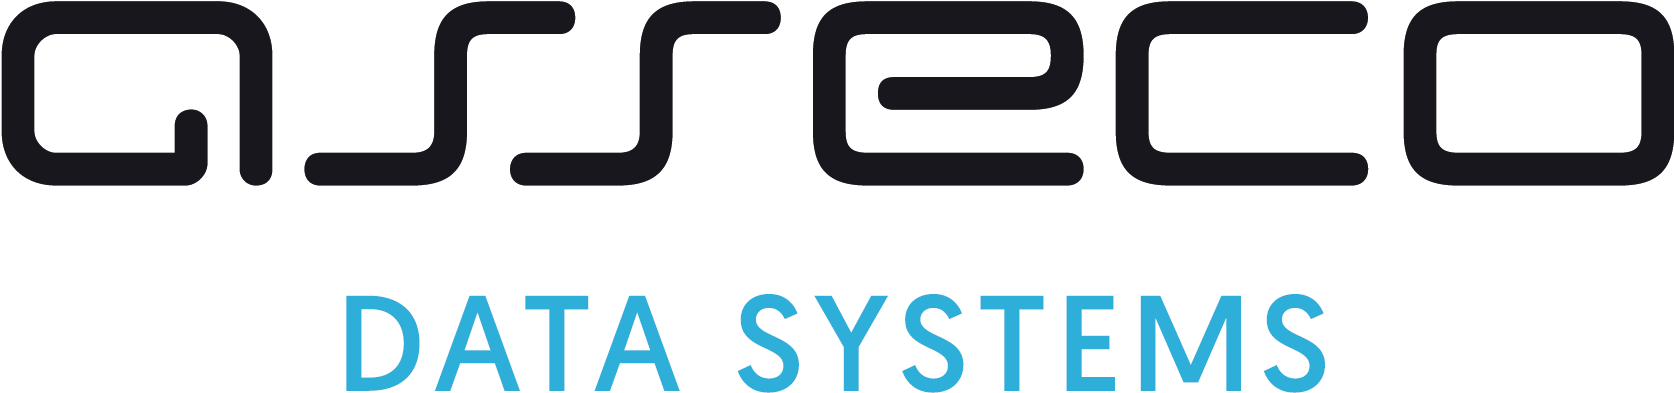 ASSECO DATA SYSTEMS